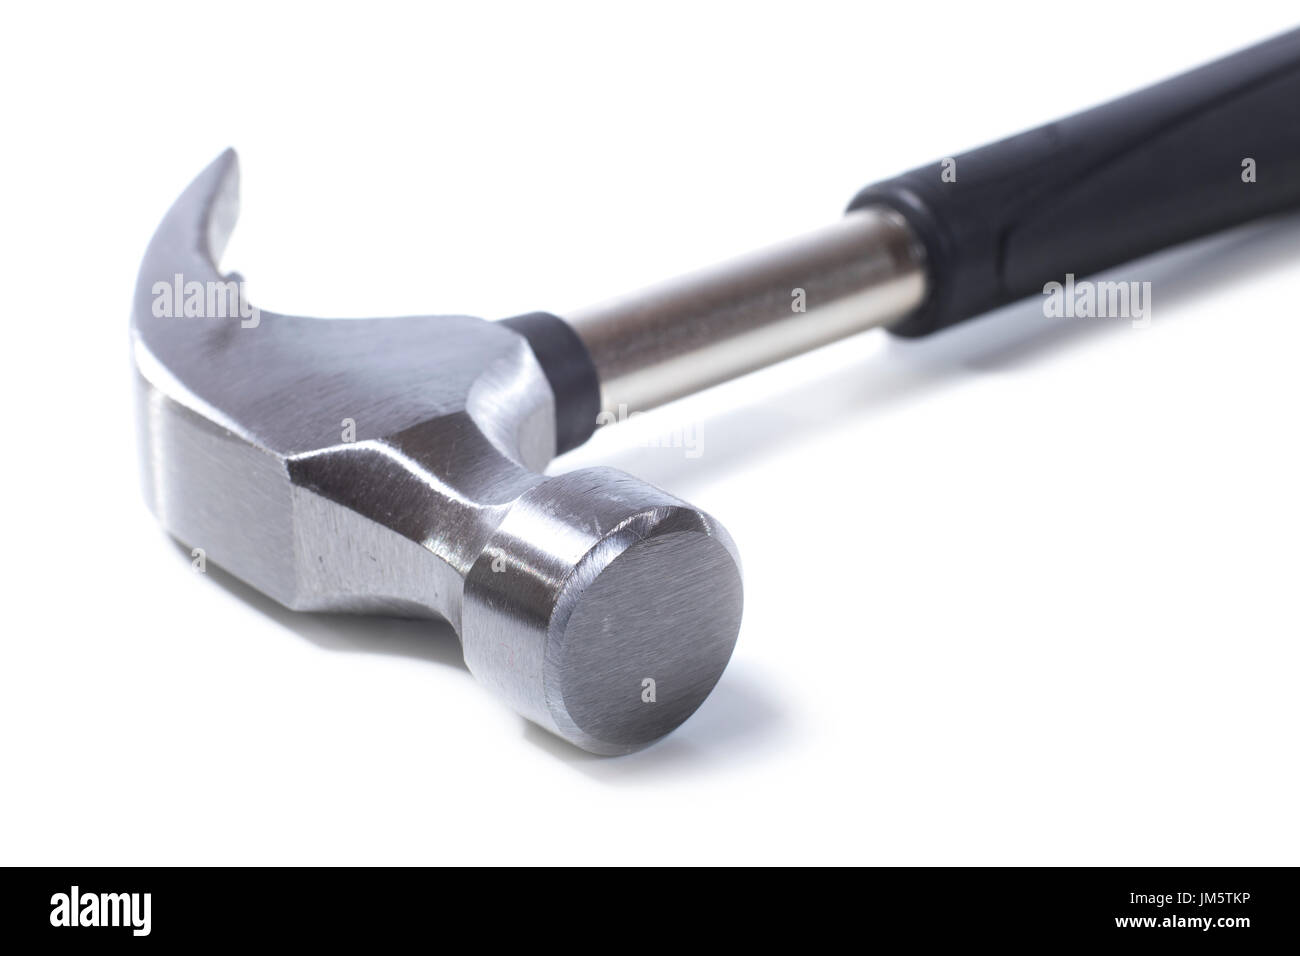 Head of a shiny new steel claw hammer in a close up view over a white background lying diagonally in the frame with copy space Stock Photo